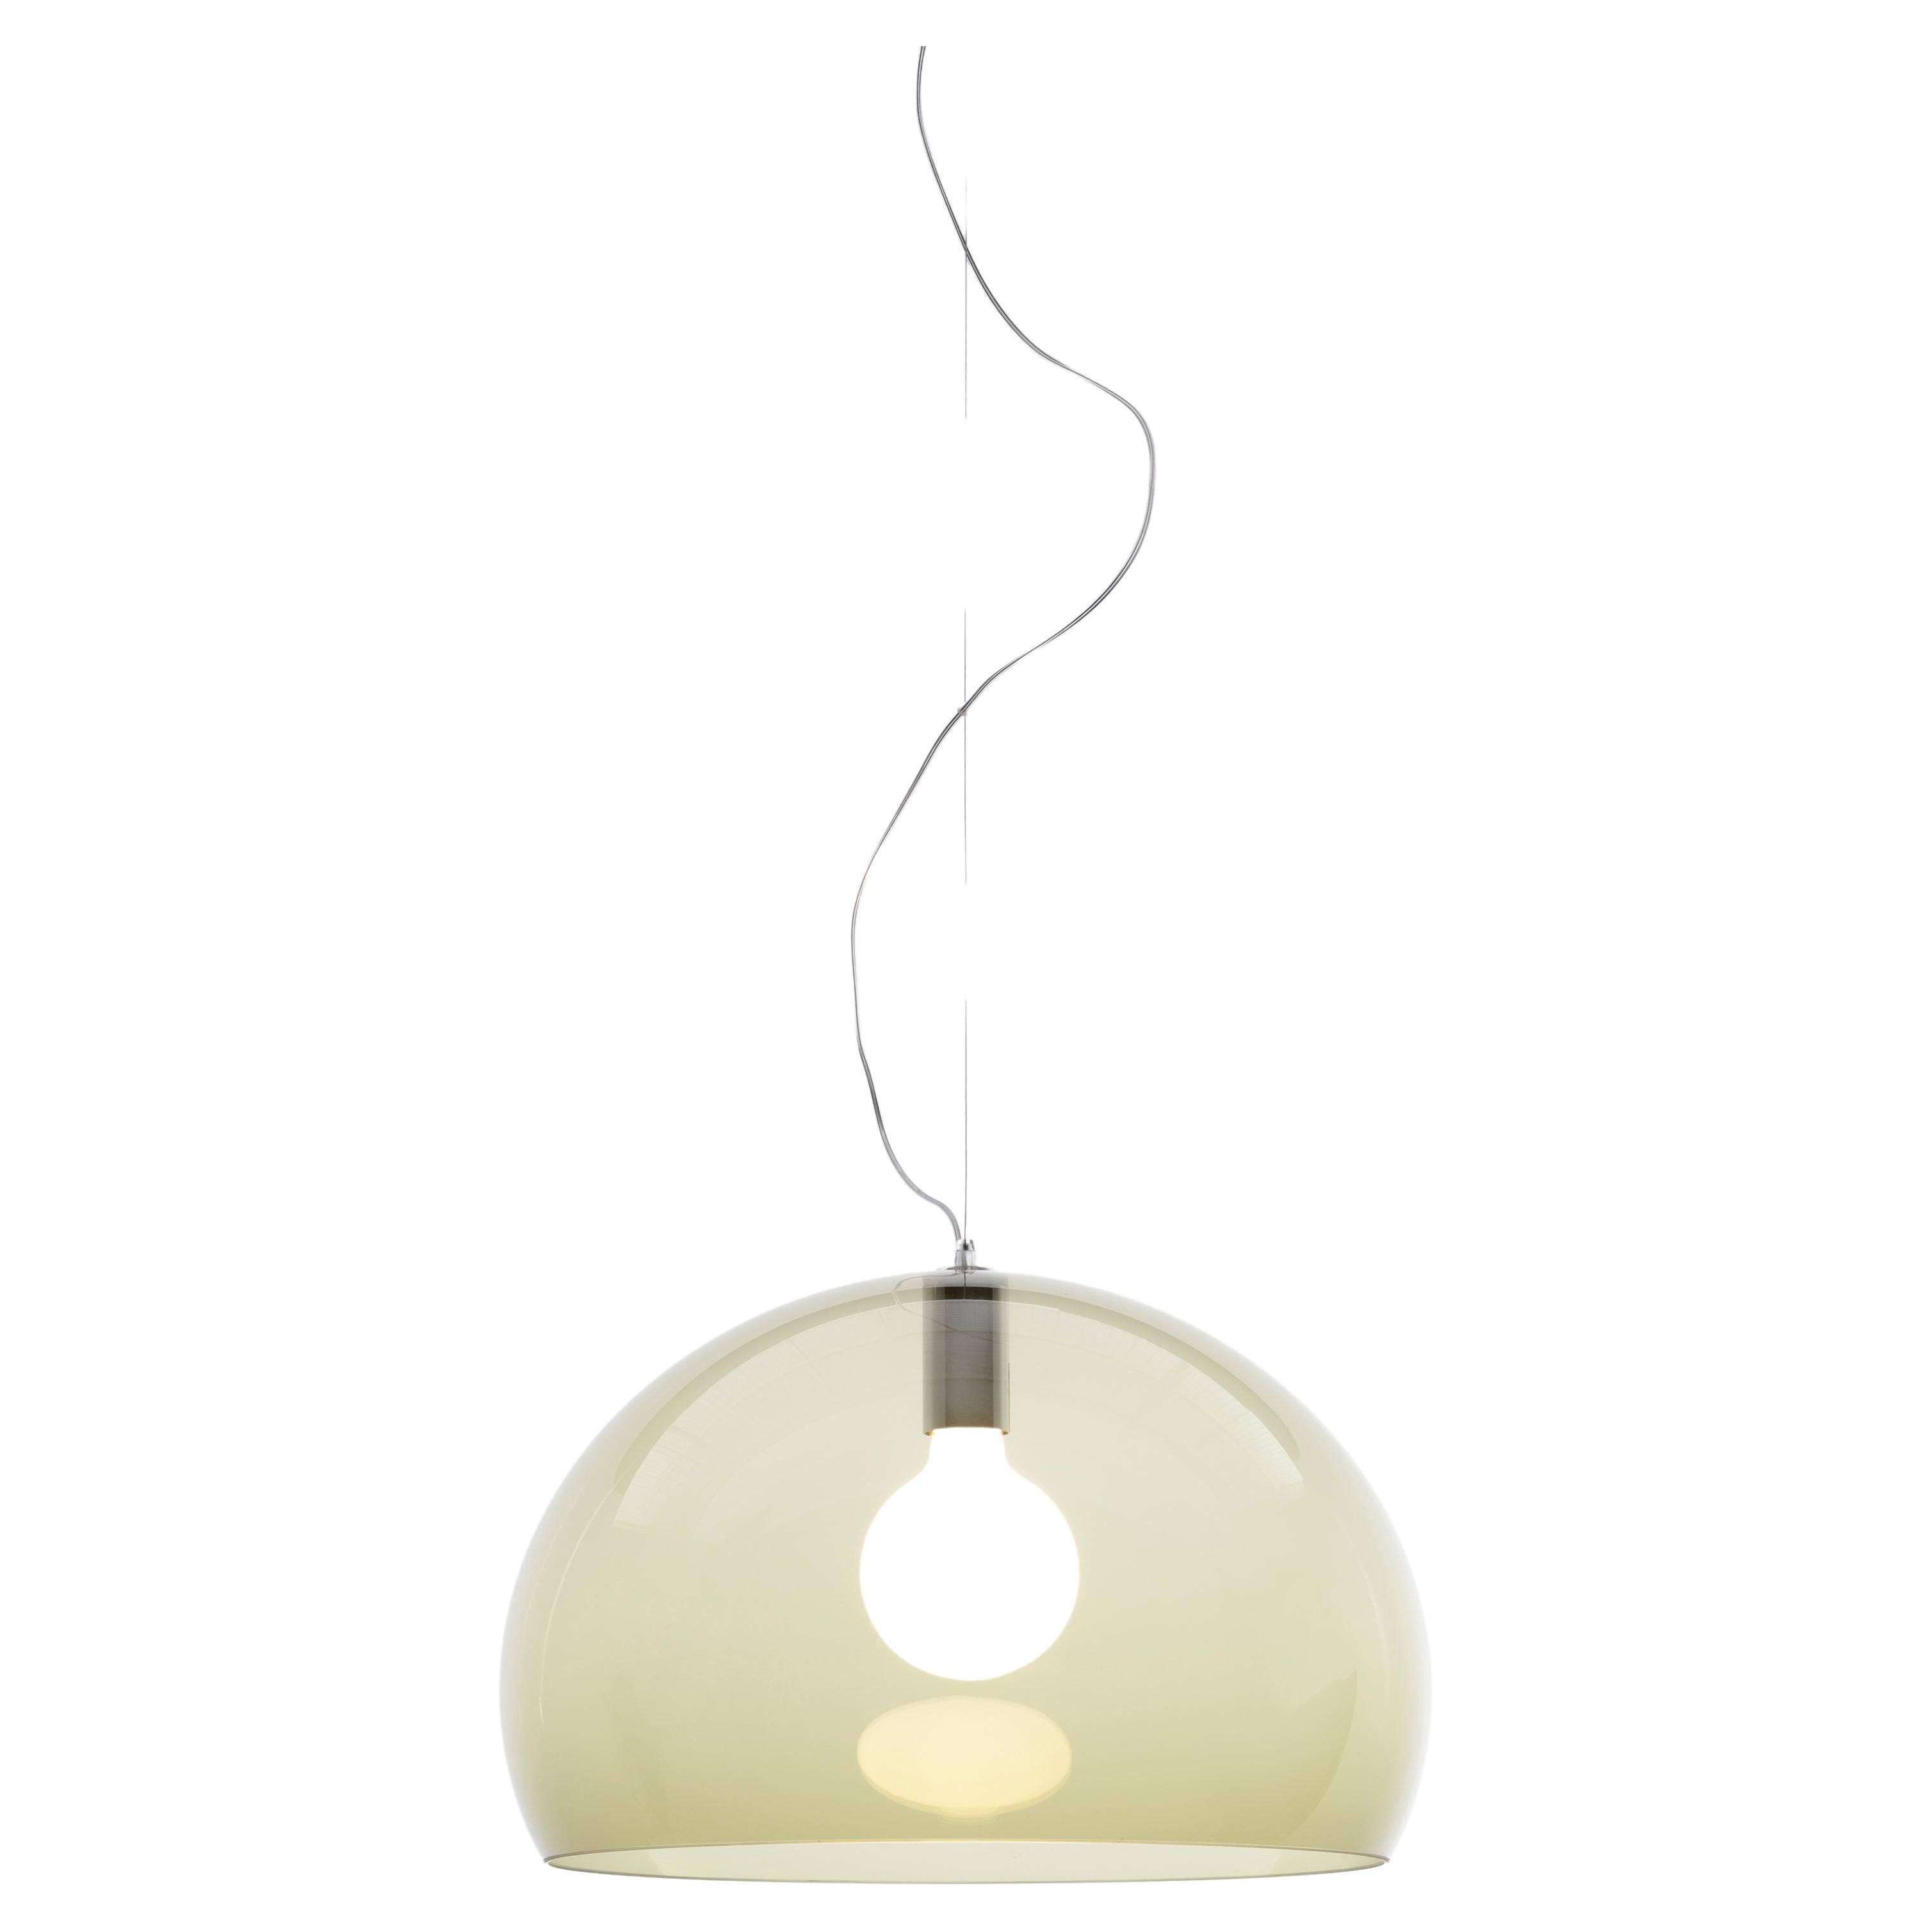 An essential lamp which is characterized by the “subtle interpretations of the theme. Made in transparent methacrylate in gold color, the cover is not perfectly hemispherical but the cut-off is underneath the height of the diameter to collect the